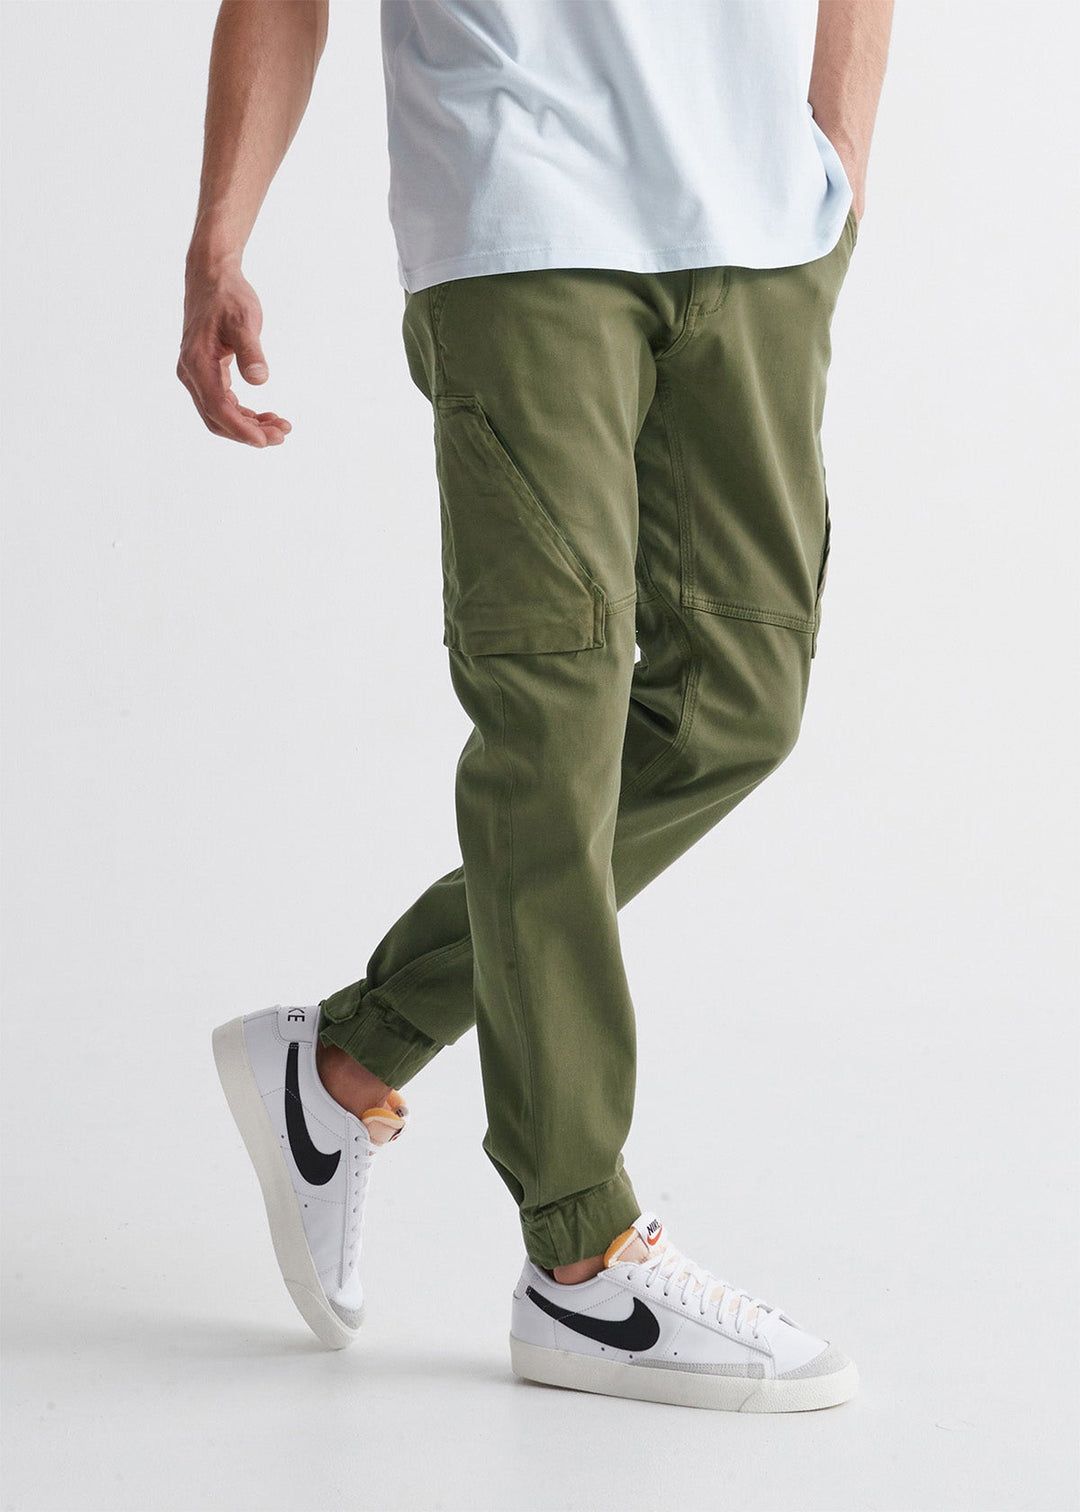 Get the Baleaf Hiking Cargo Pants for 15 Off on Amazon